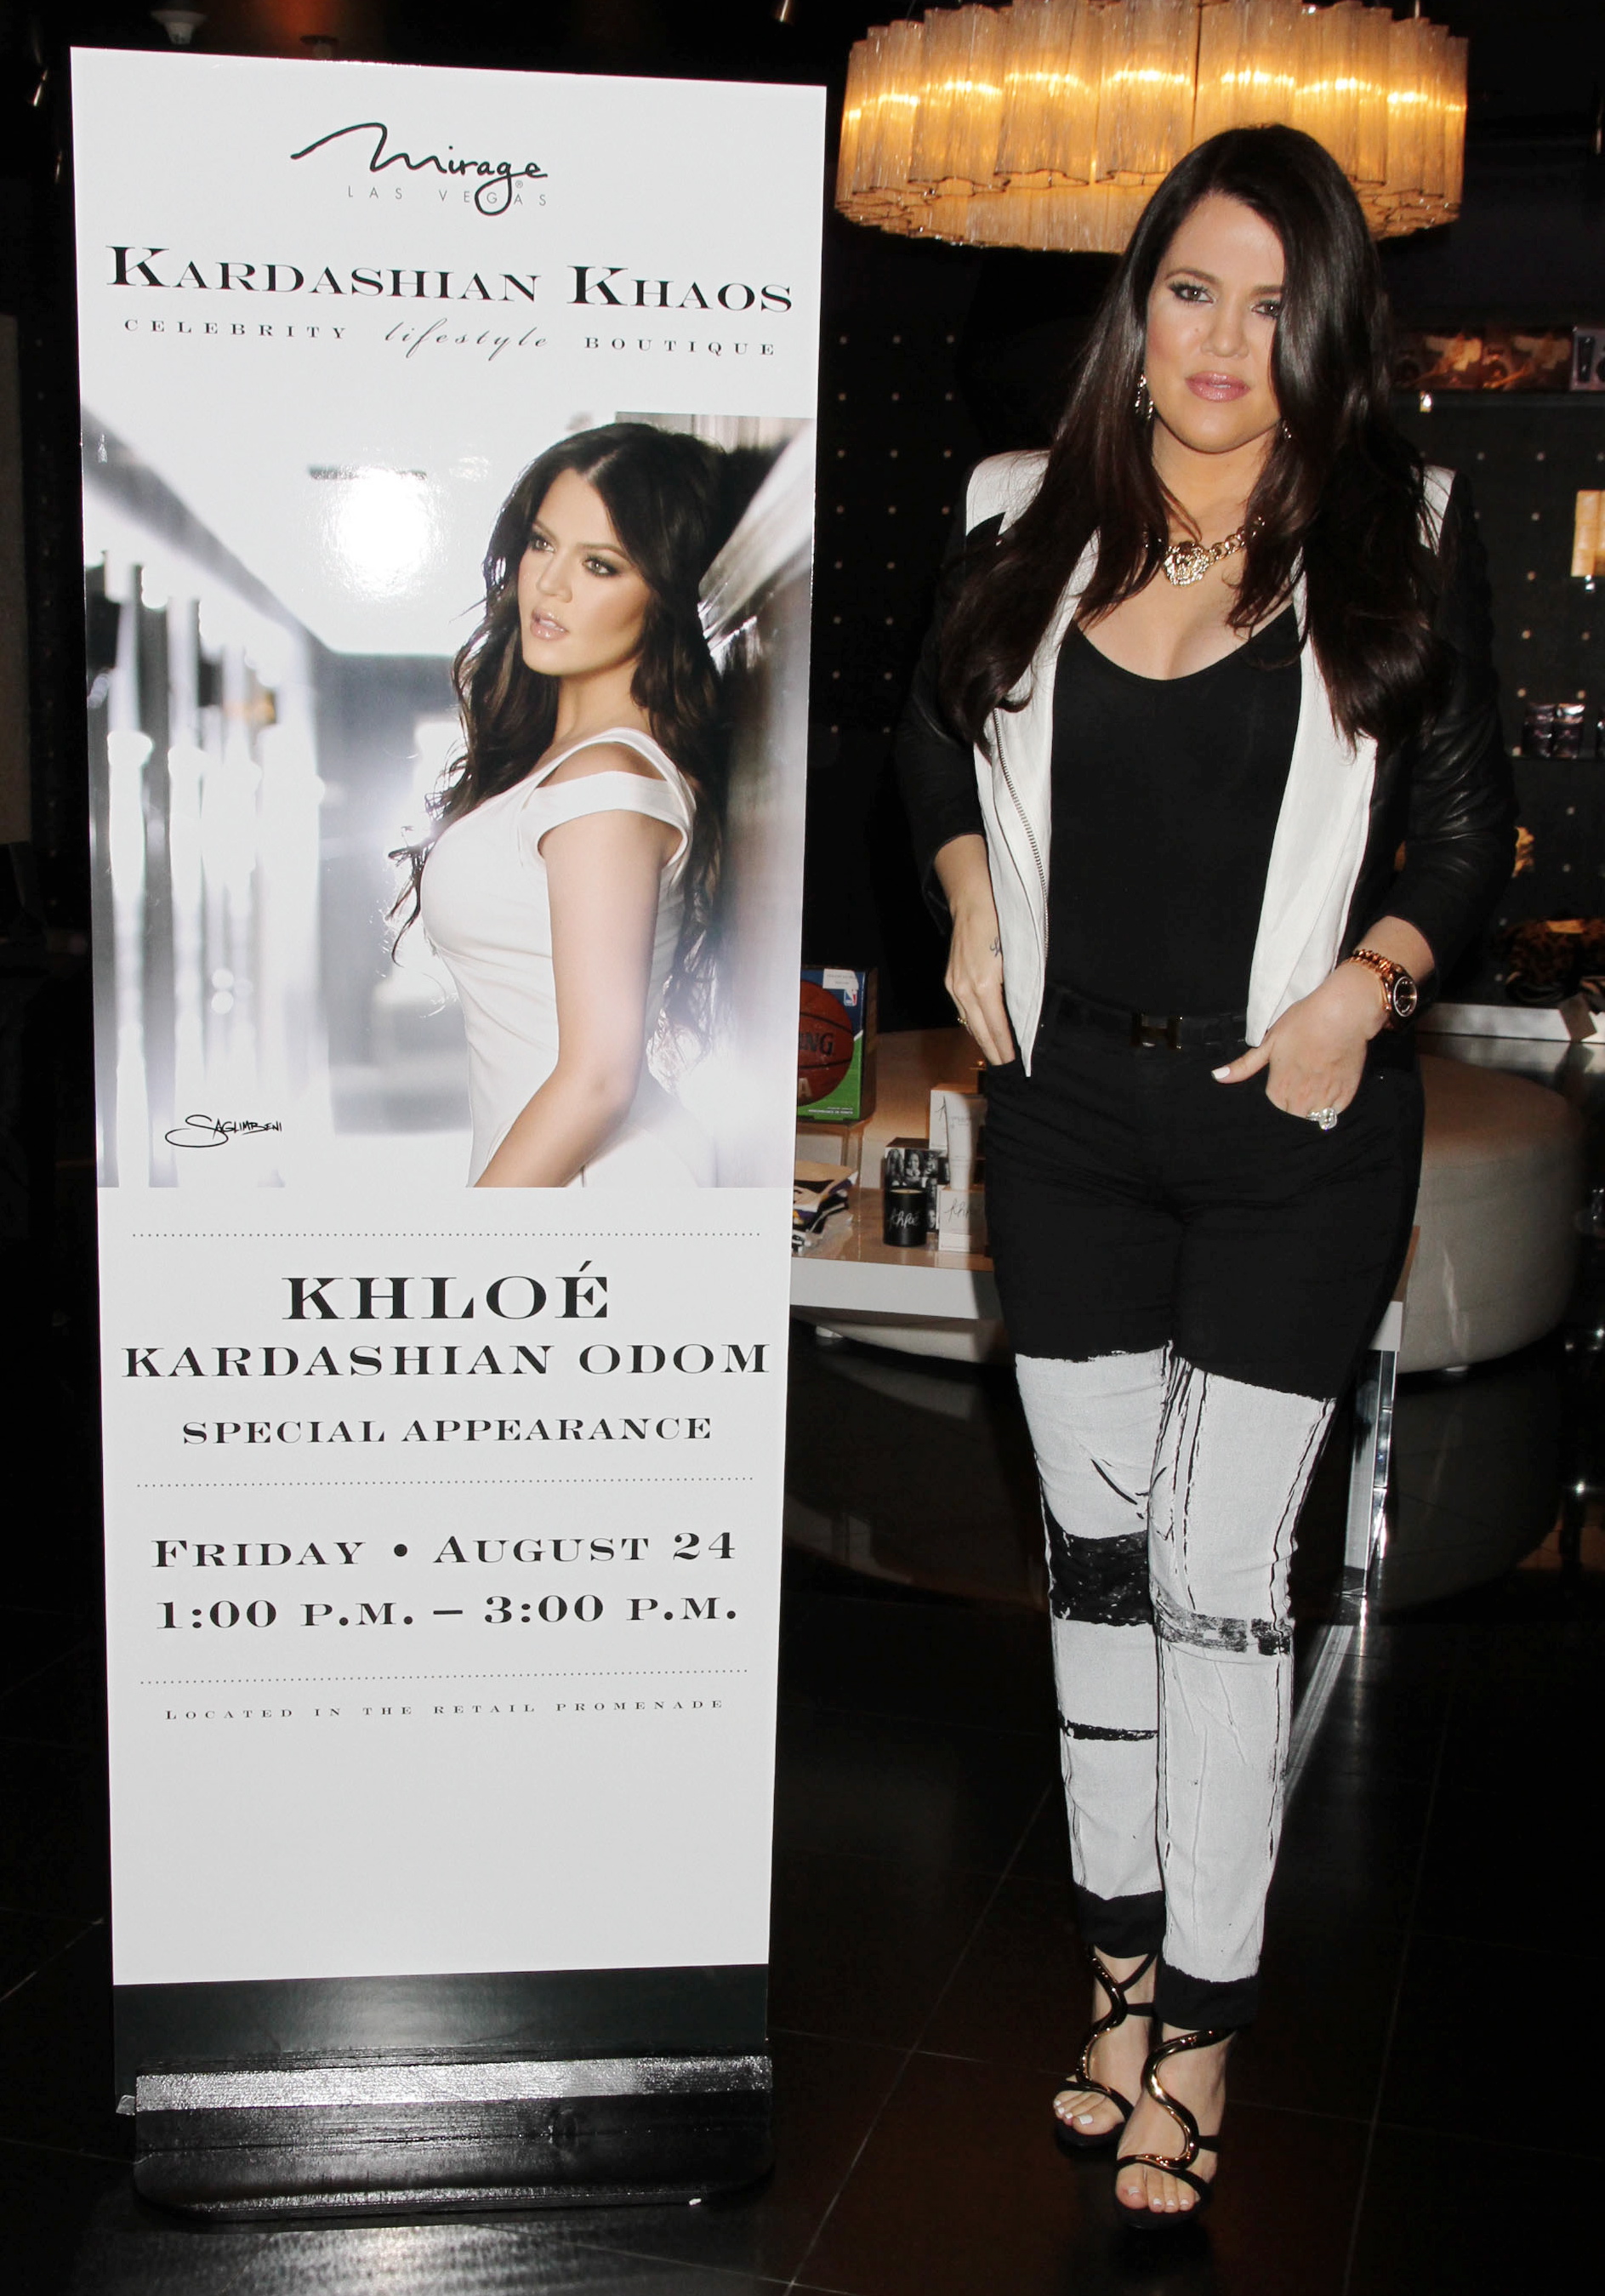 Khloe Kardashian-Odom makes her first solo apperance at Kardashian Khaos inside the Mirage Hotel and Casino, to support her and husband Lamar Odom's perfume 